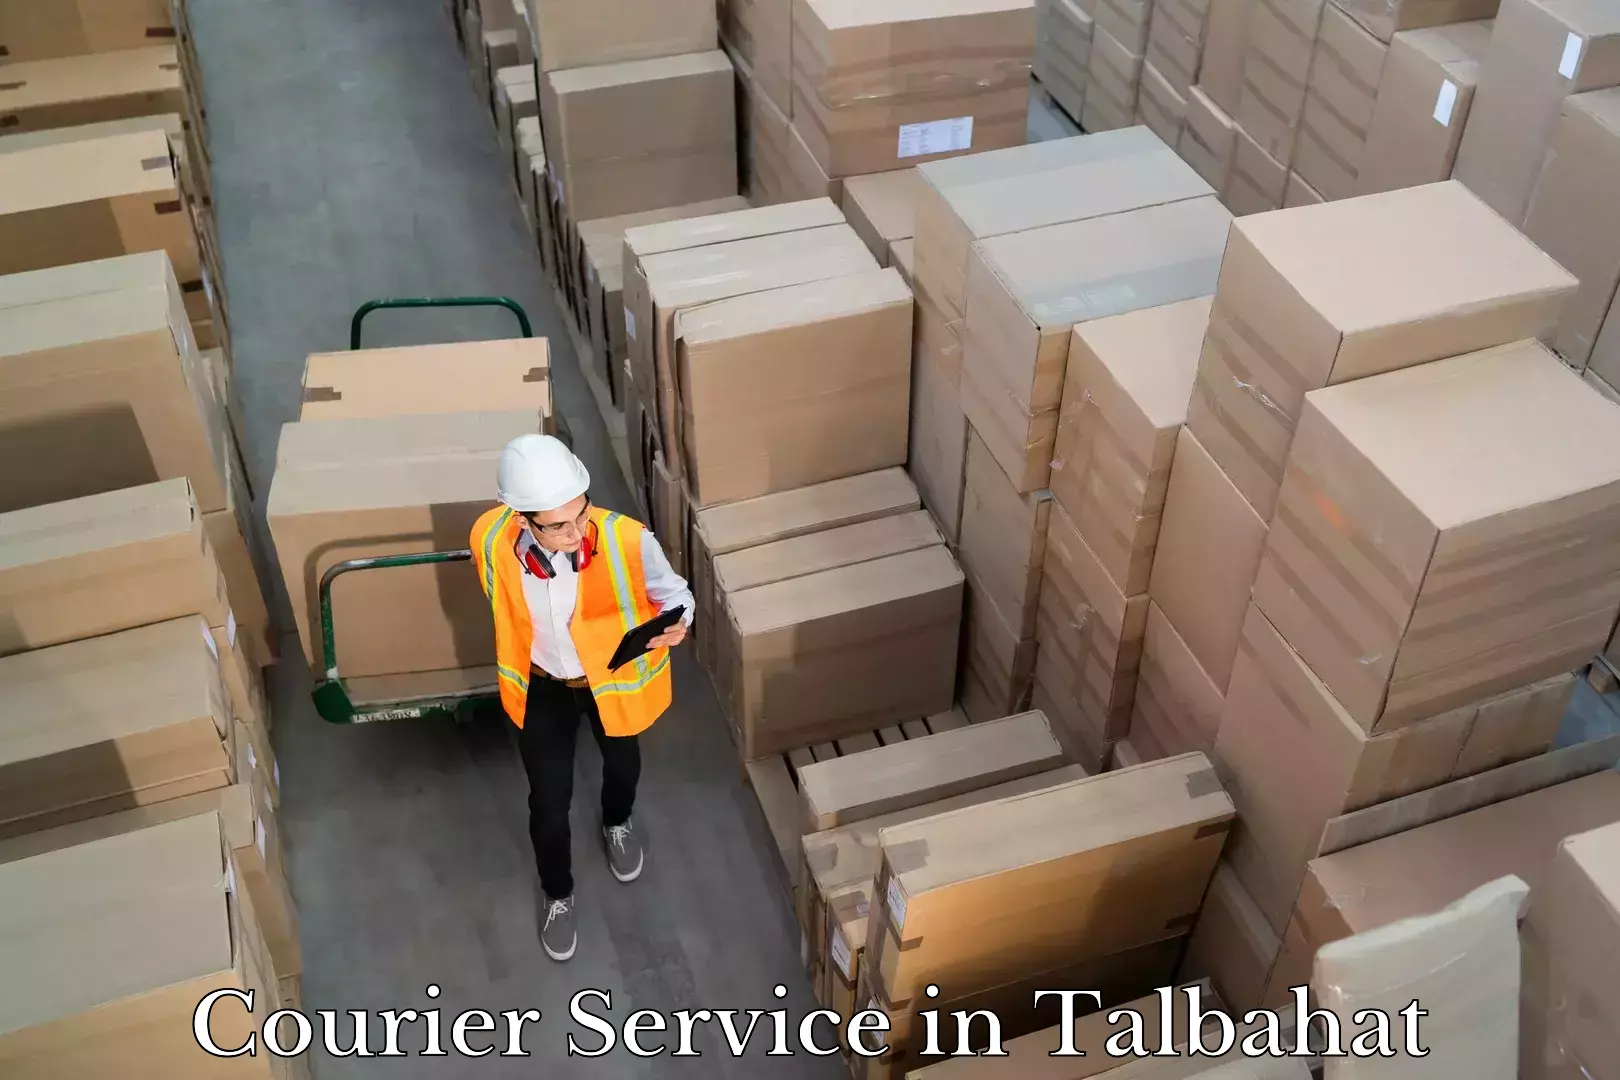 Enhanced delivery experience in Talbahat